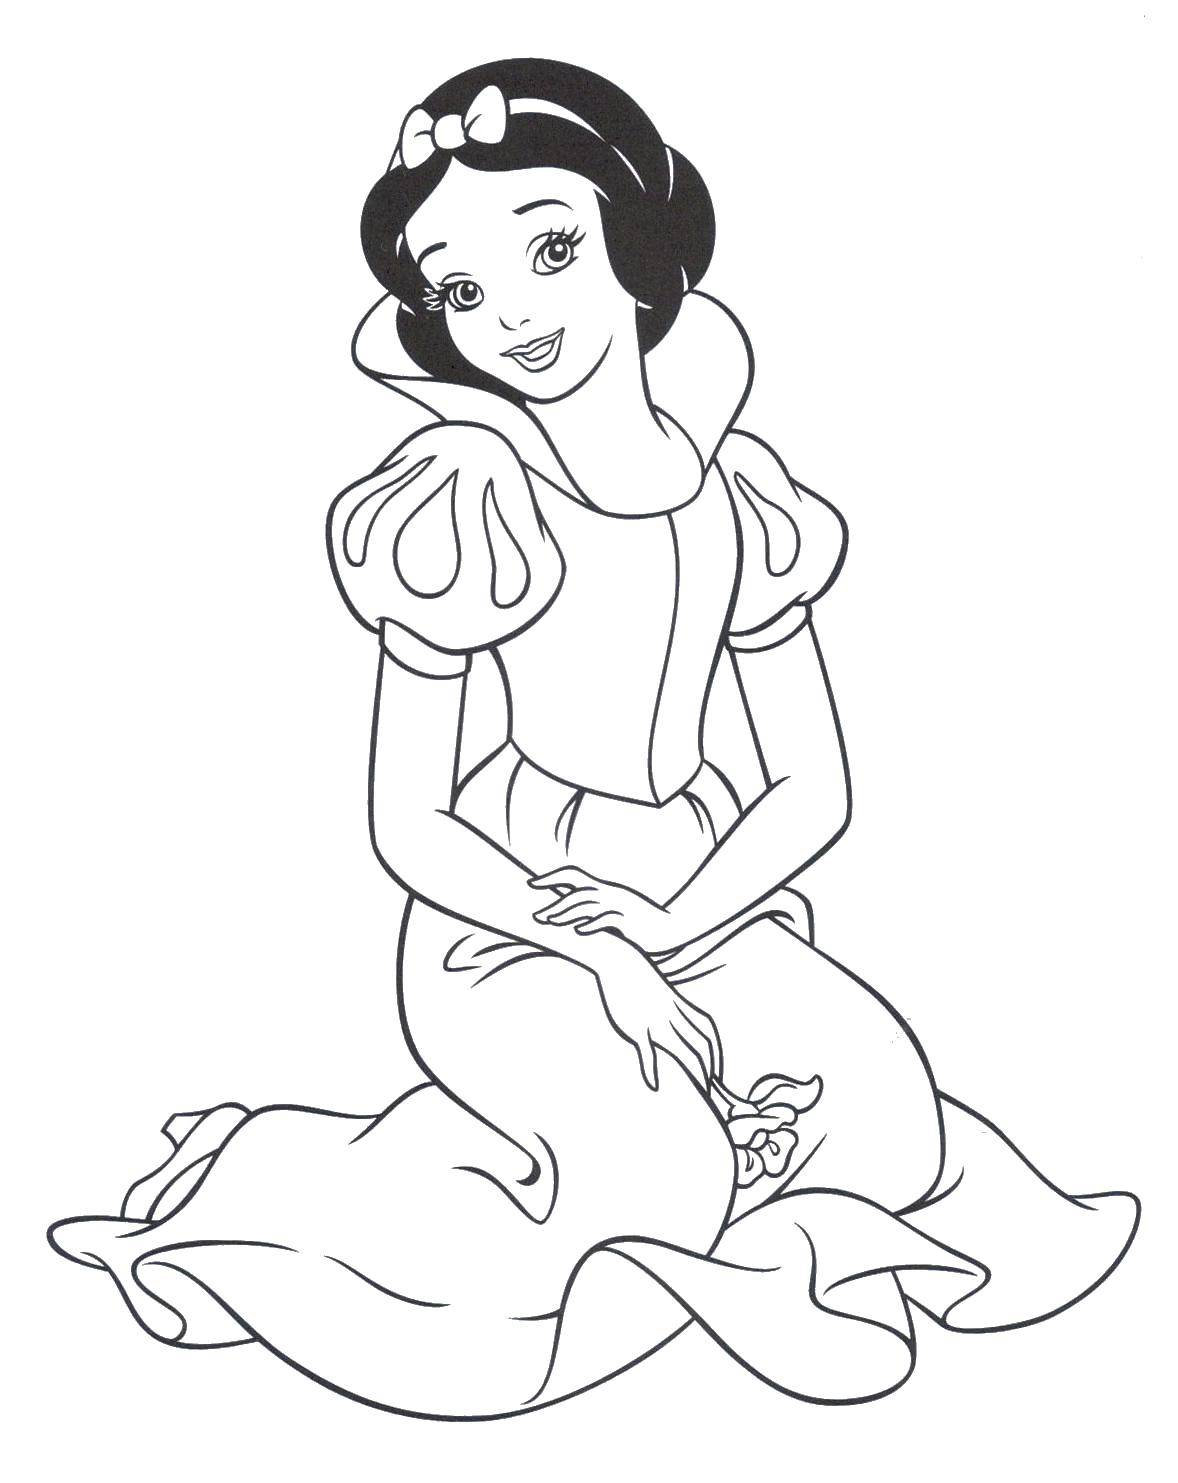 Coloring Snow white. Category gnomes. Tags:  Disney, Snow White.